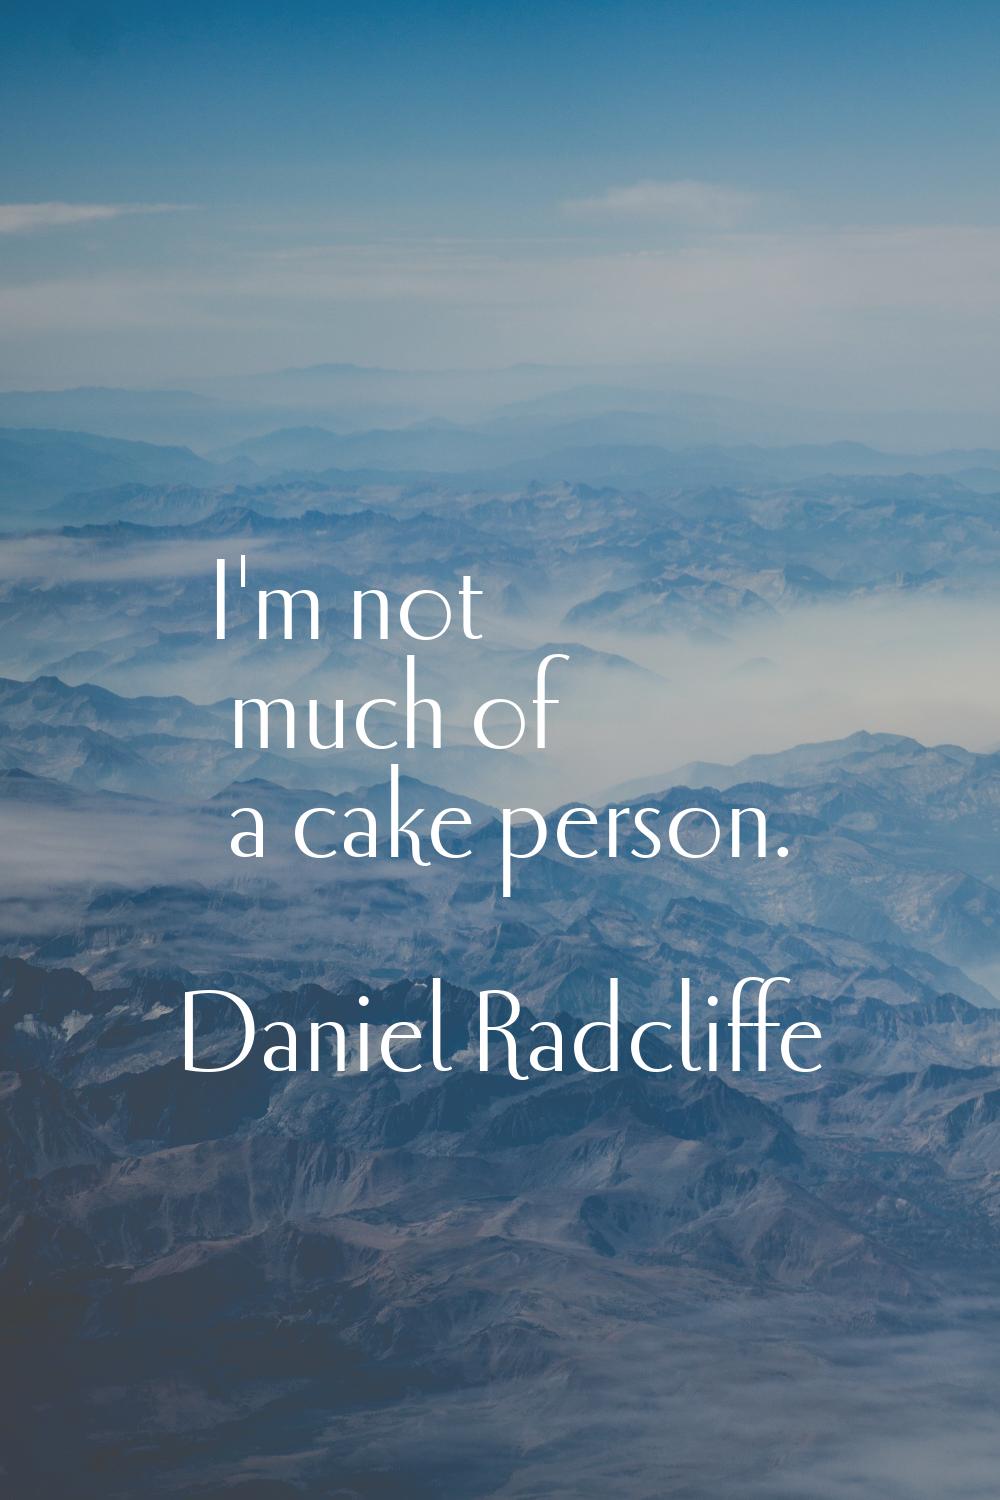 I'm not much of a cake person.